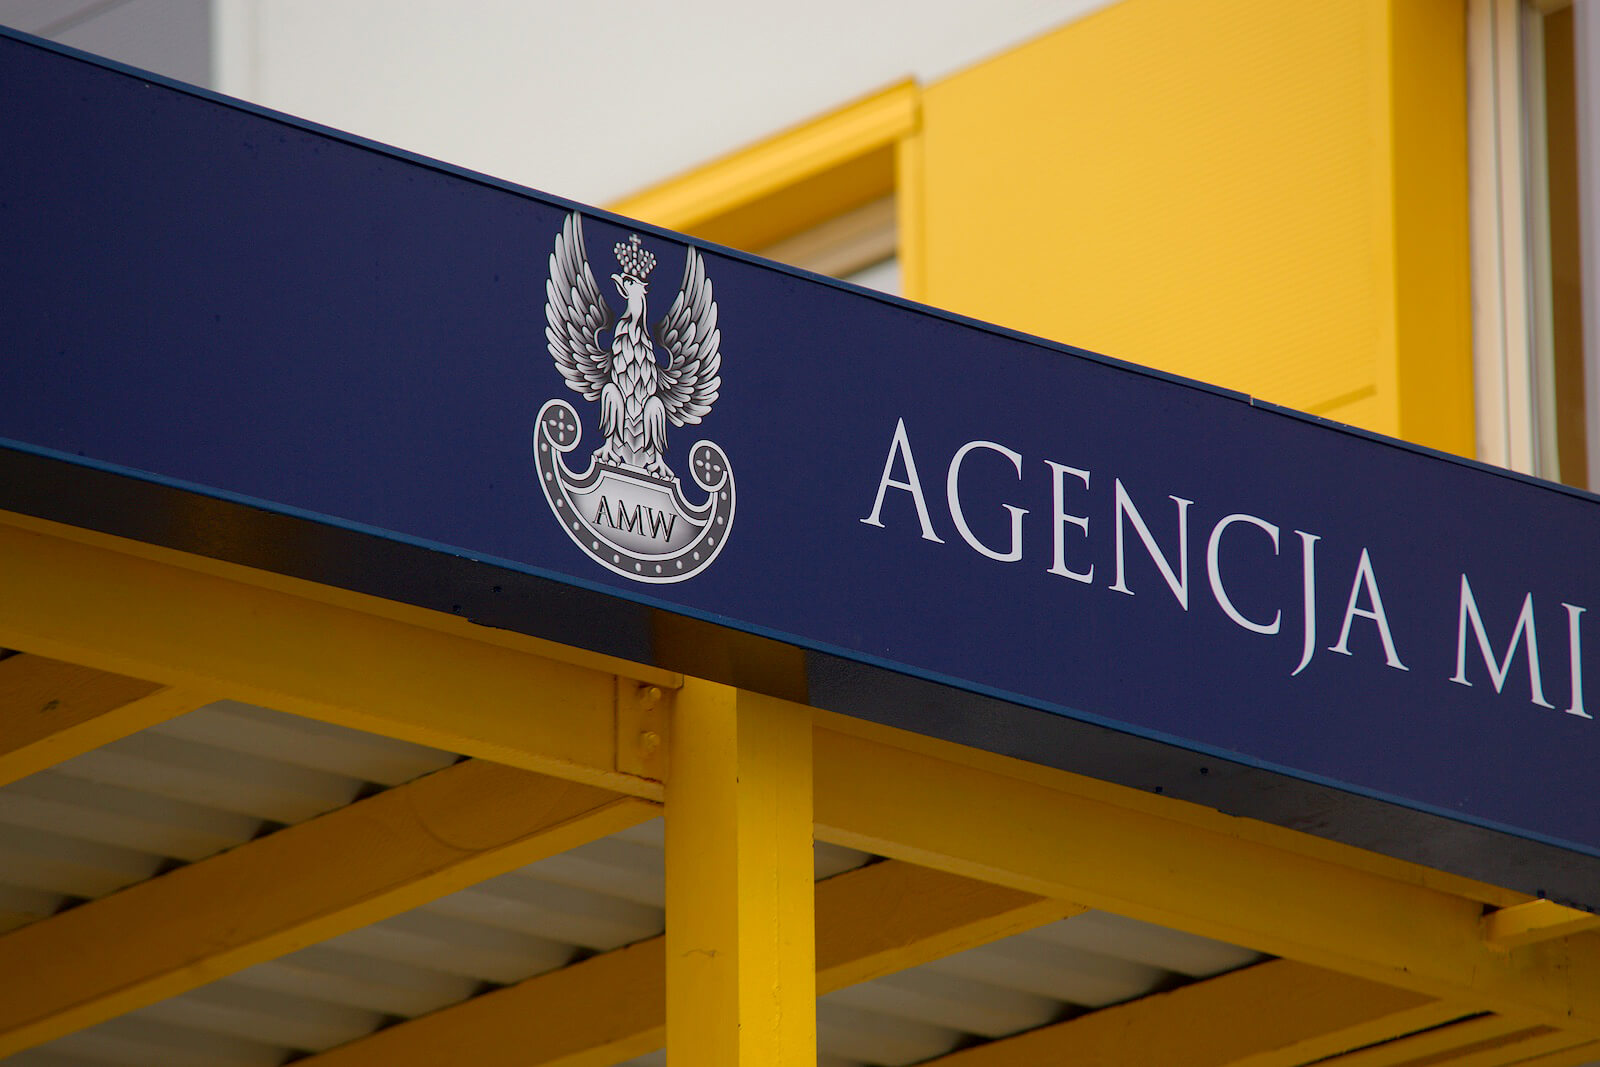 Property Agency Military - large-format coffers - Military Property Agency - large format lightbox with spatial lettering above the entrance